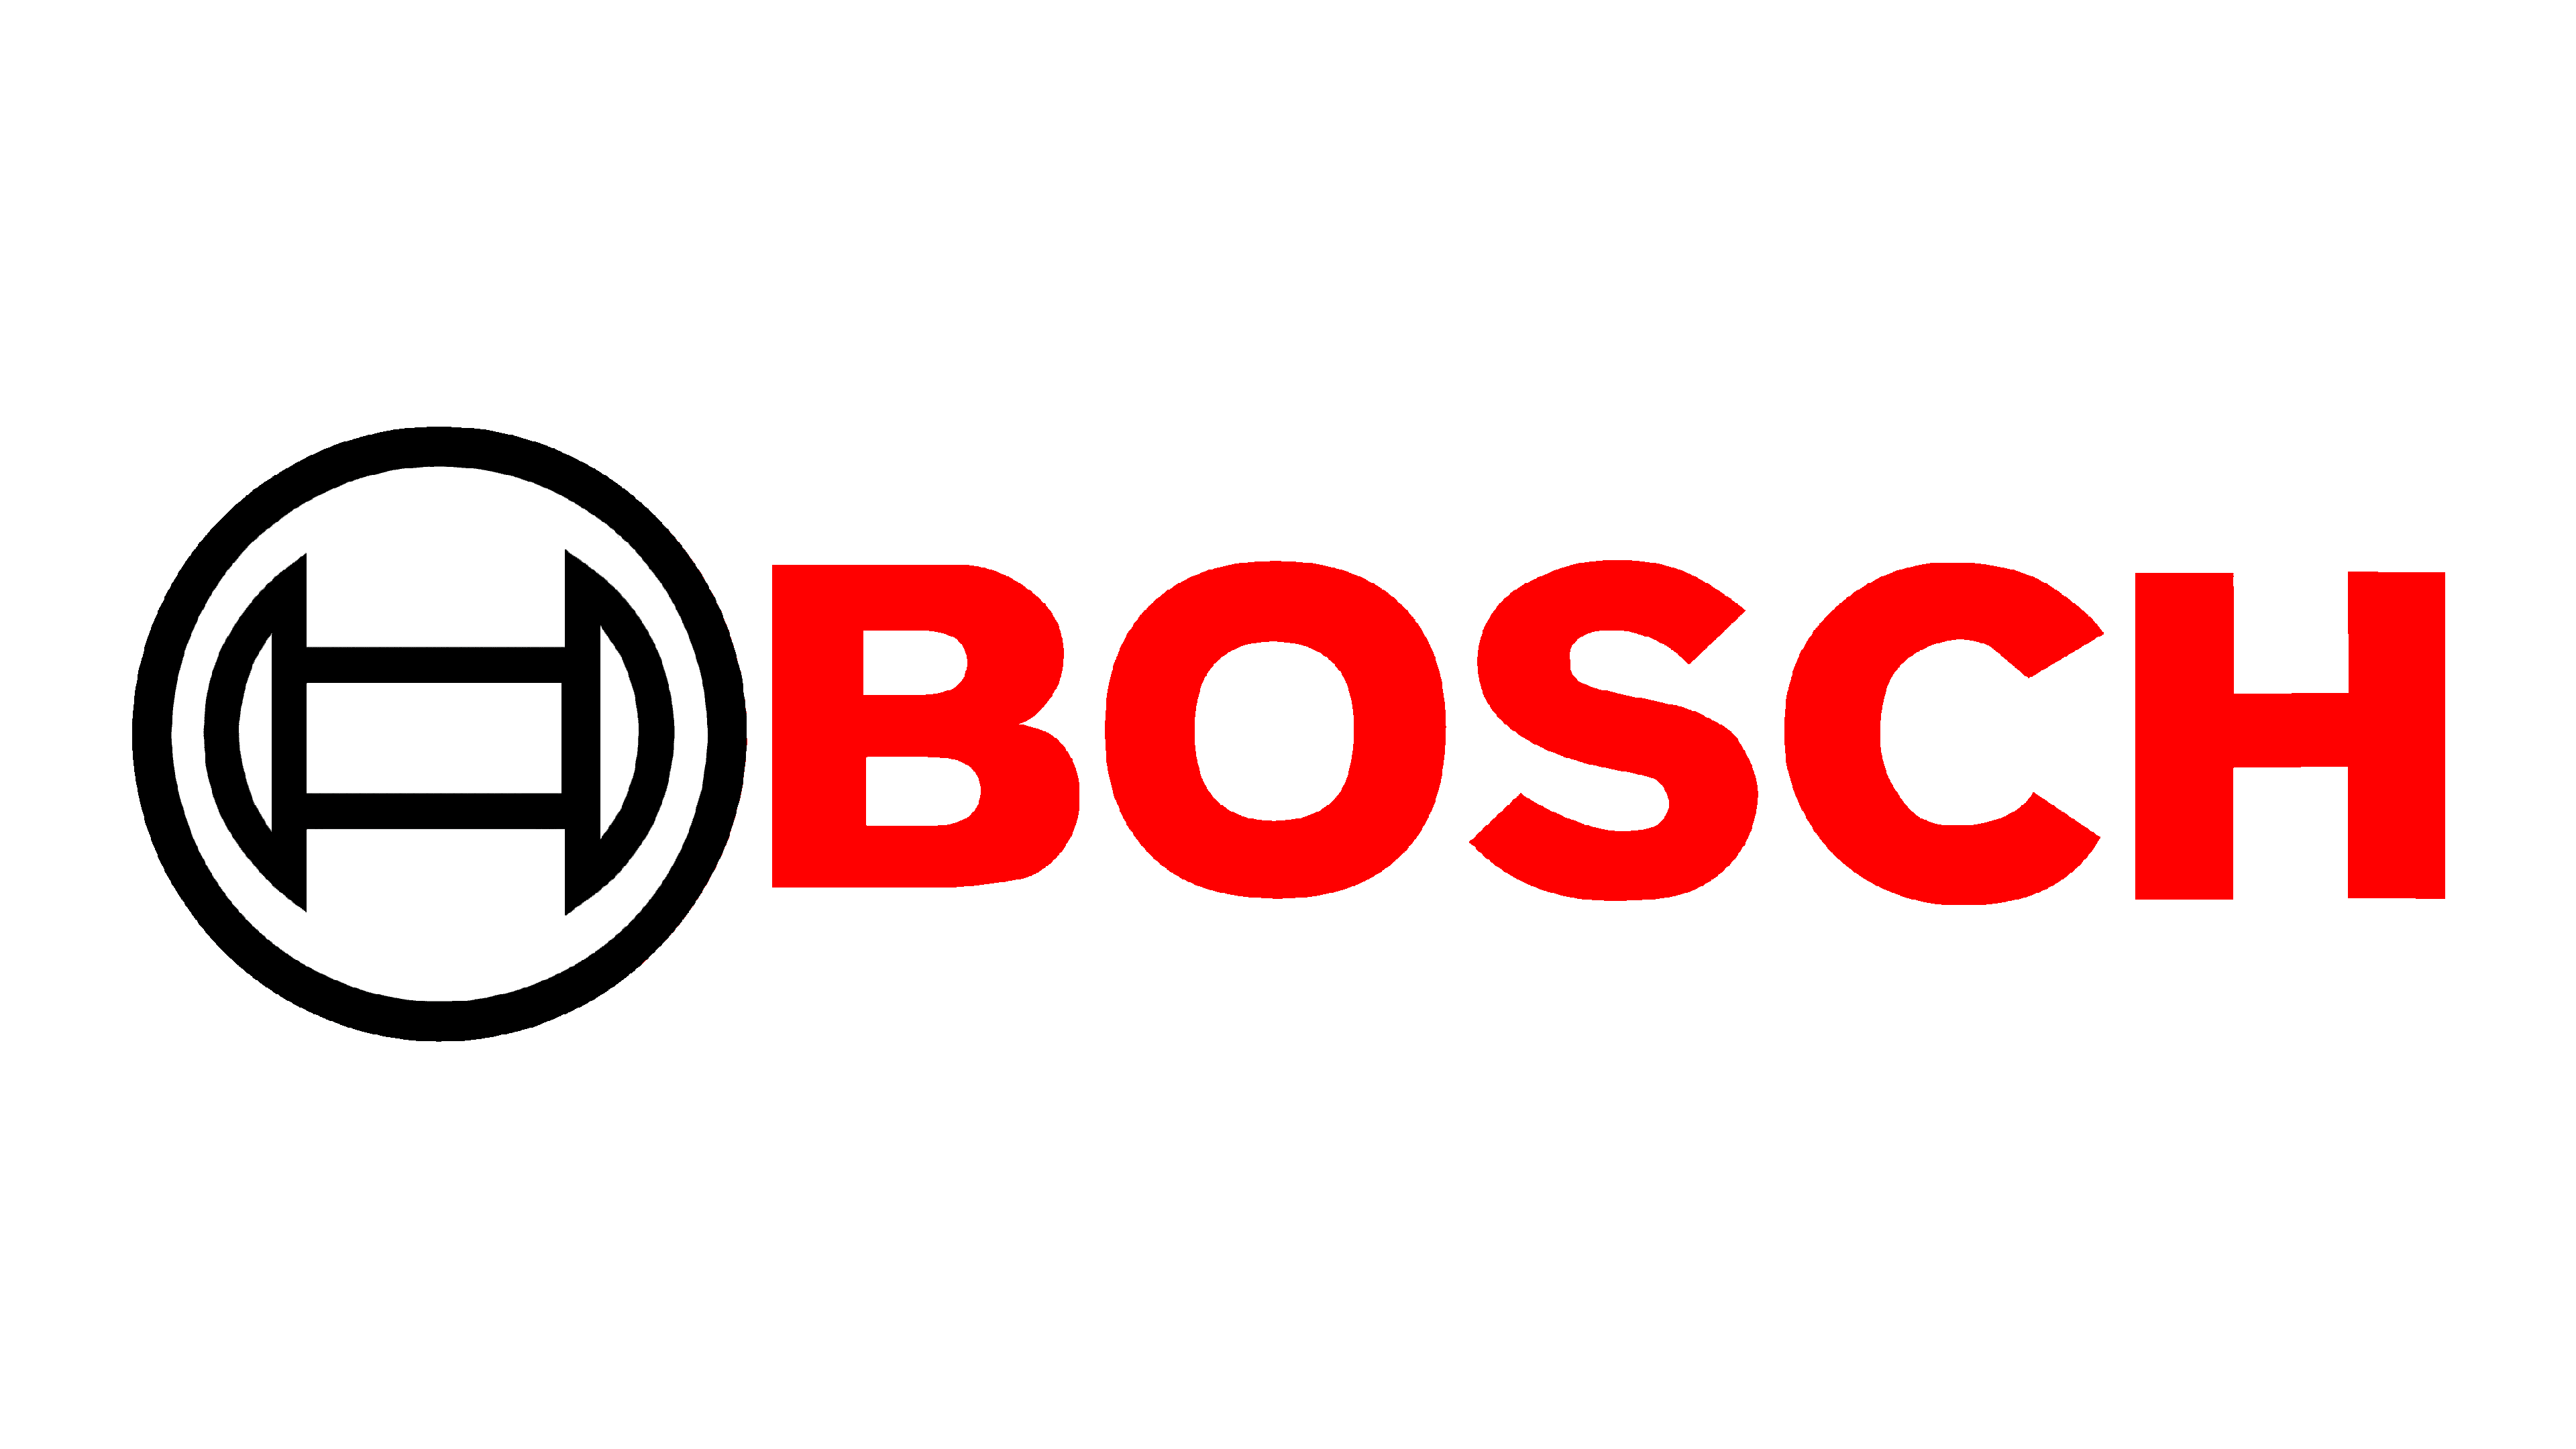 The creation of the Bosch logo